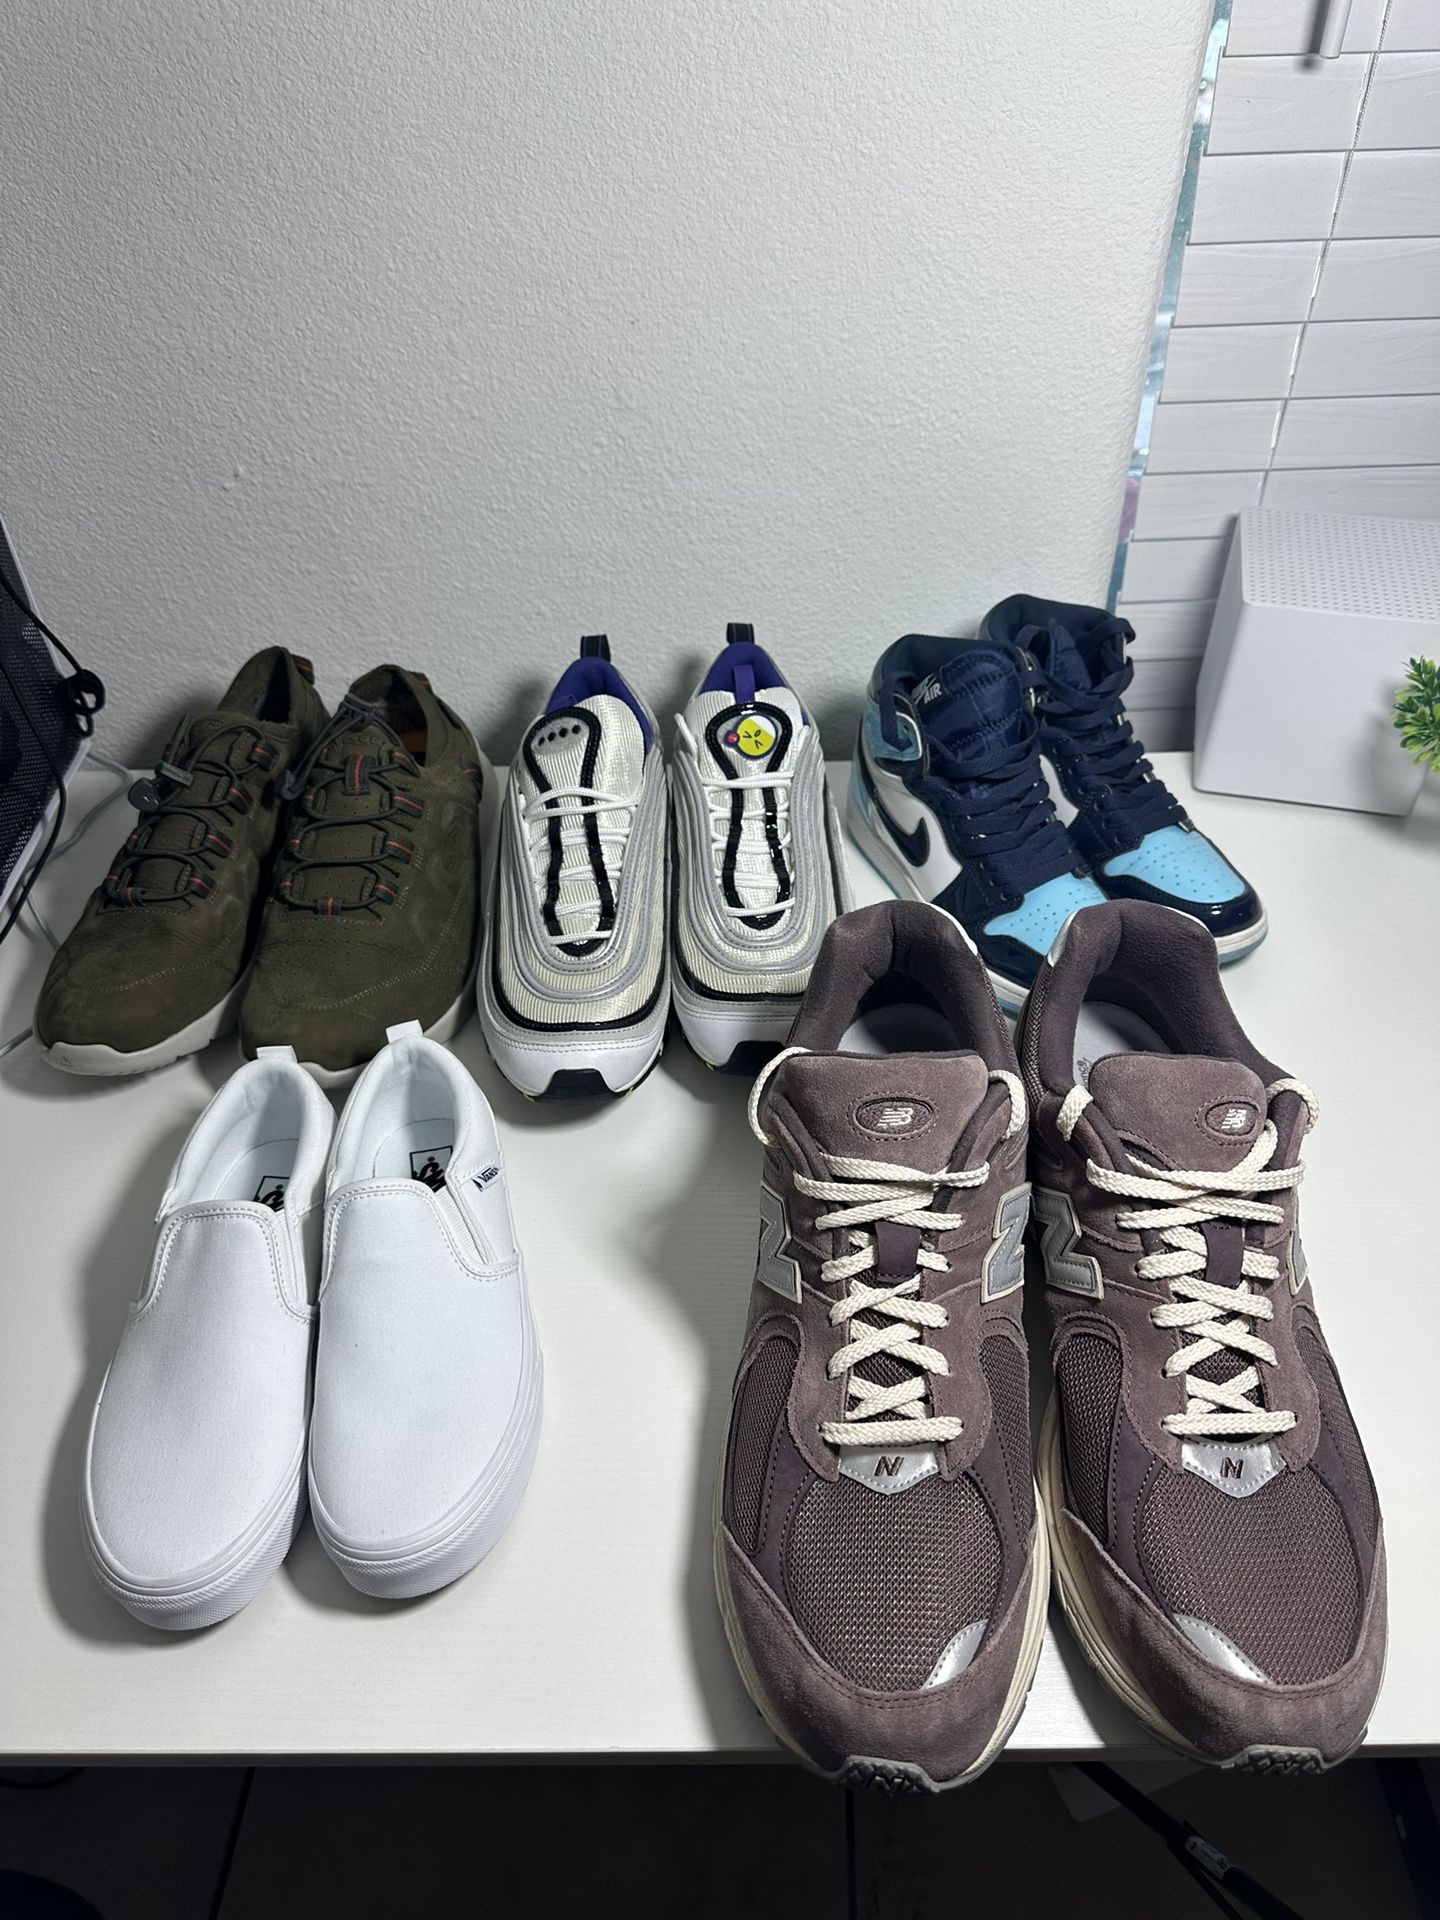 Different Kind Of Shoes, Keen, Nike, Vans, New Balance